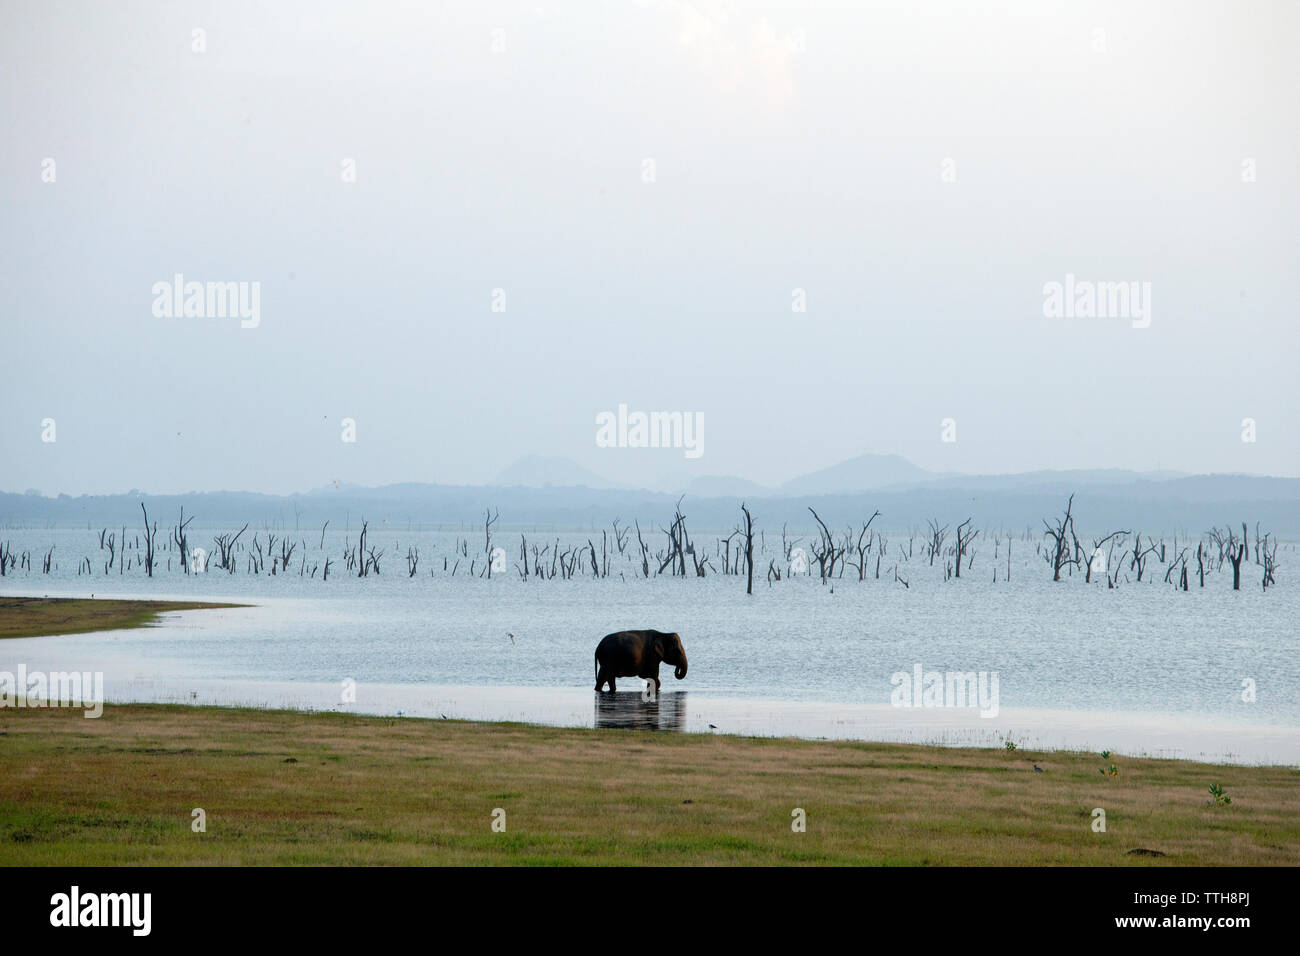 Elephant standing in lake against clear sky Stock Photo